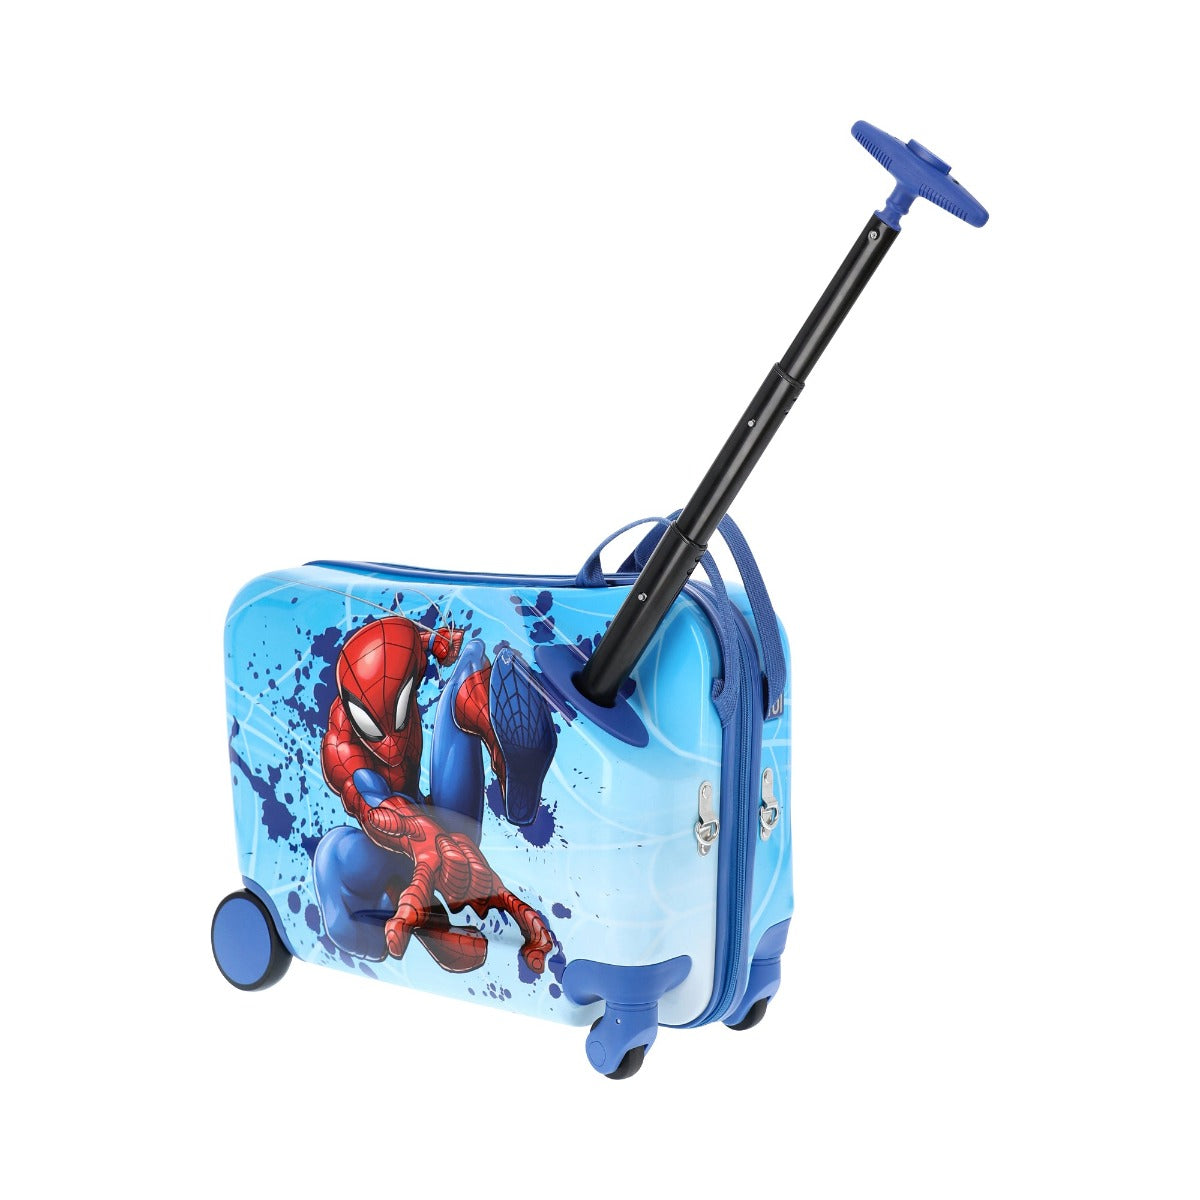 Ful Marvel Spiderman Ride-on 14.5" carry-on rolling luggage for kids